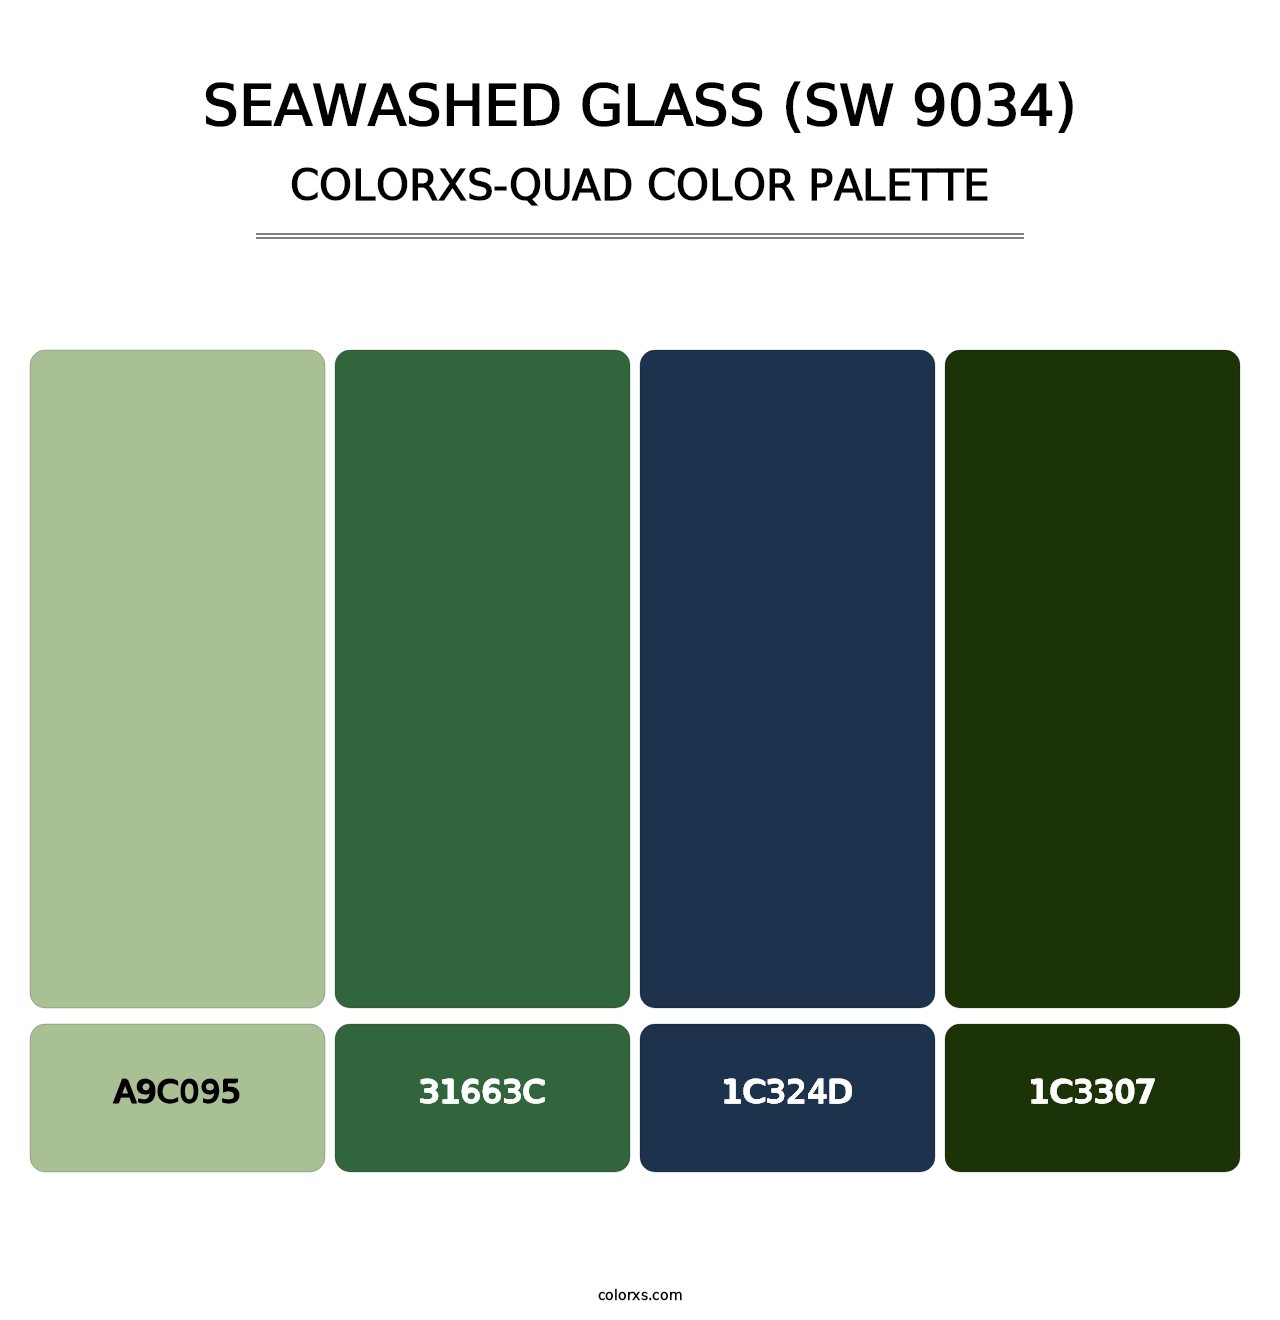 Seawashed Glass (SW 9034) - Colorxs Quad Palette